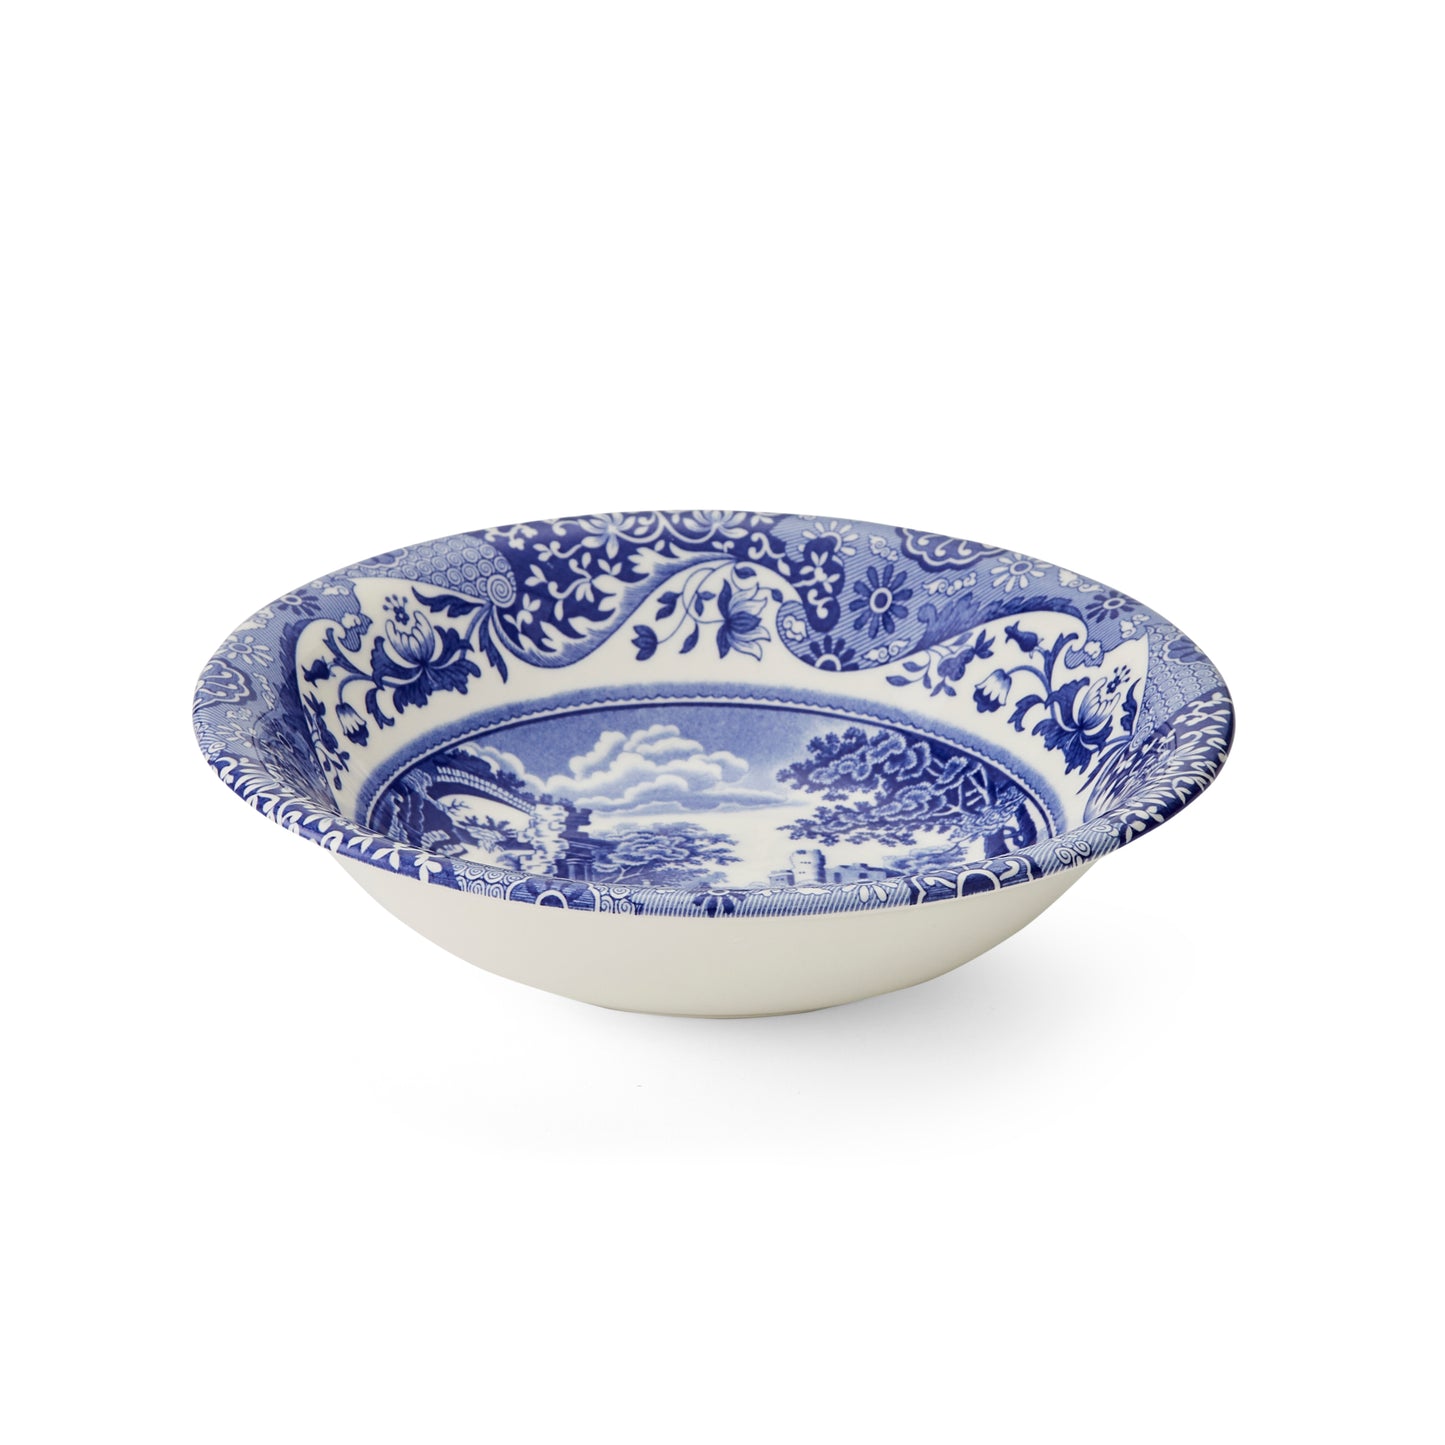 Cereal bowl - Blue Italian set of 2